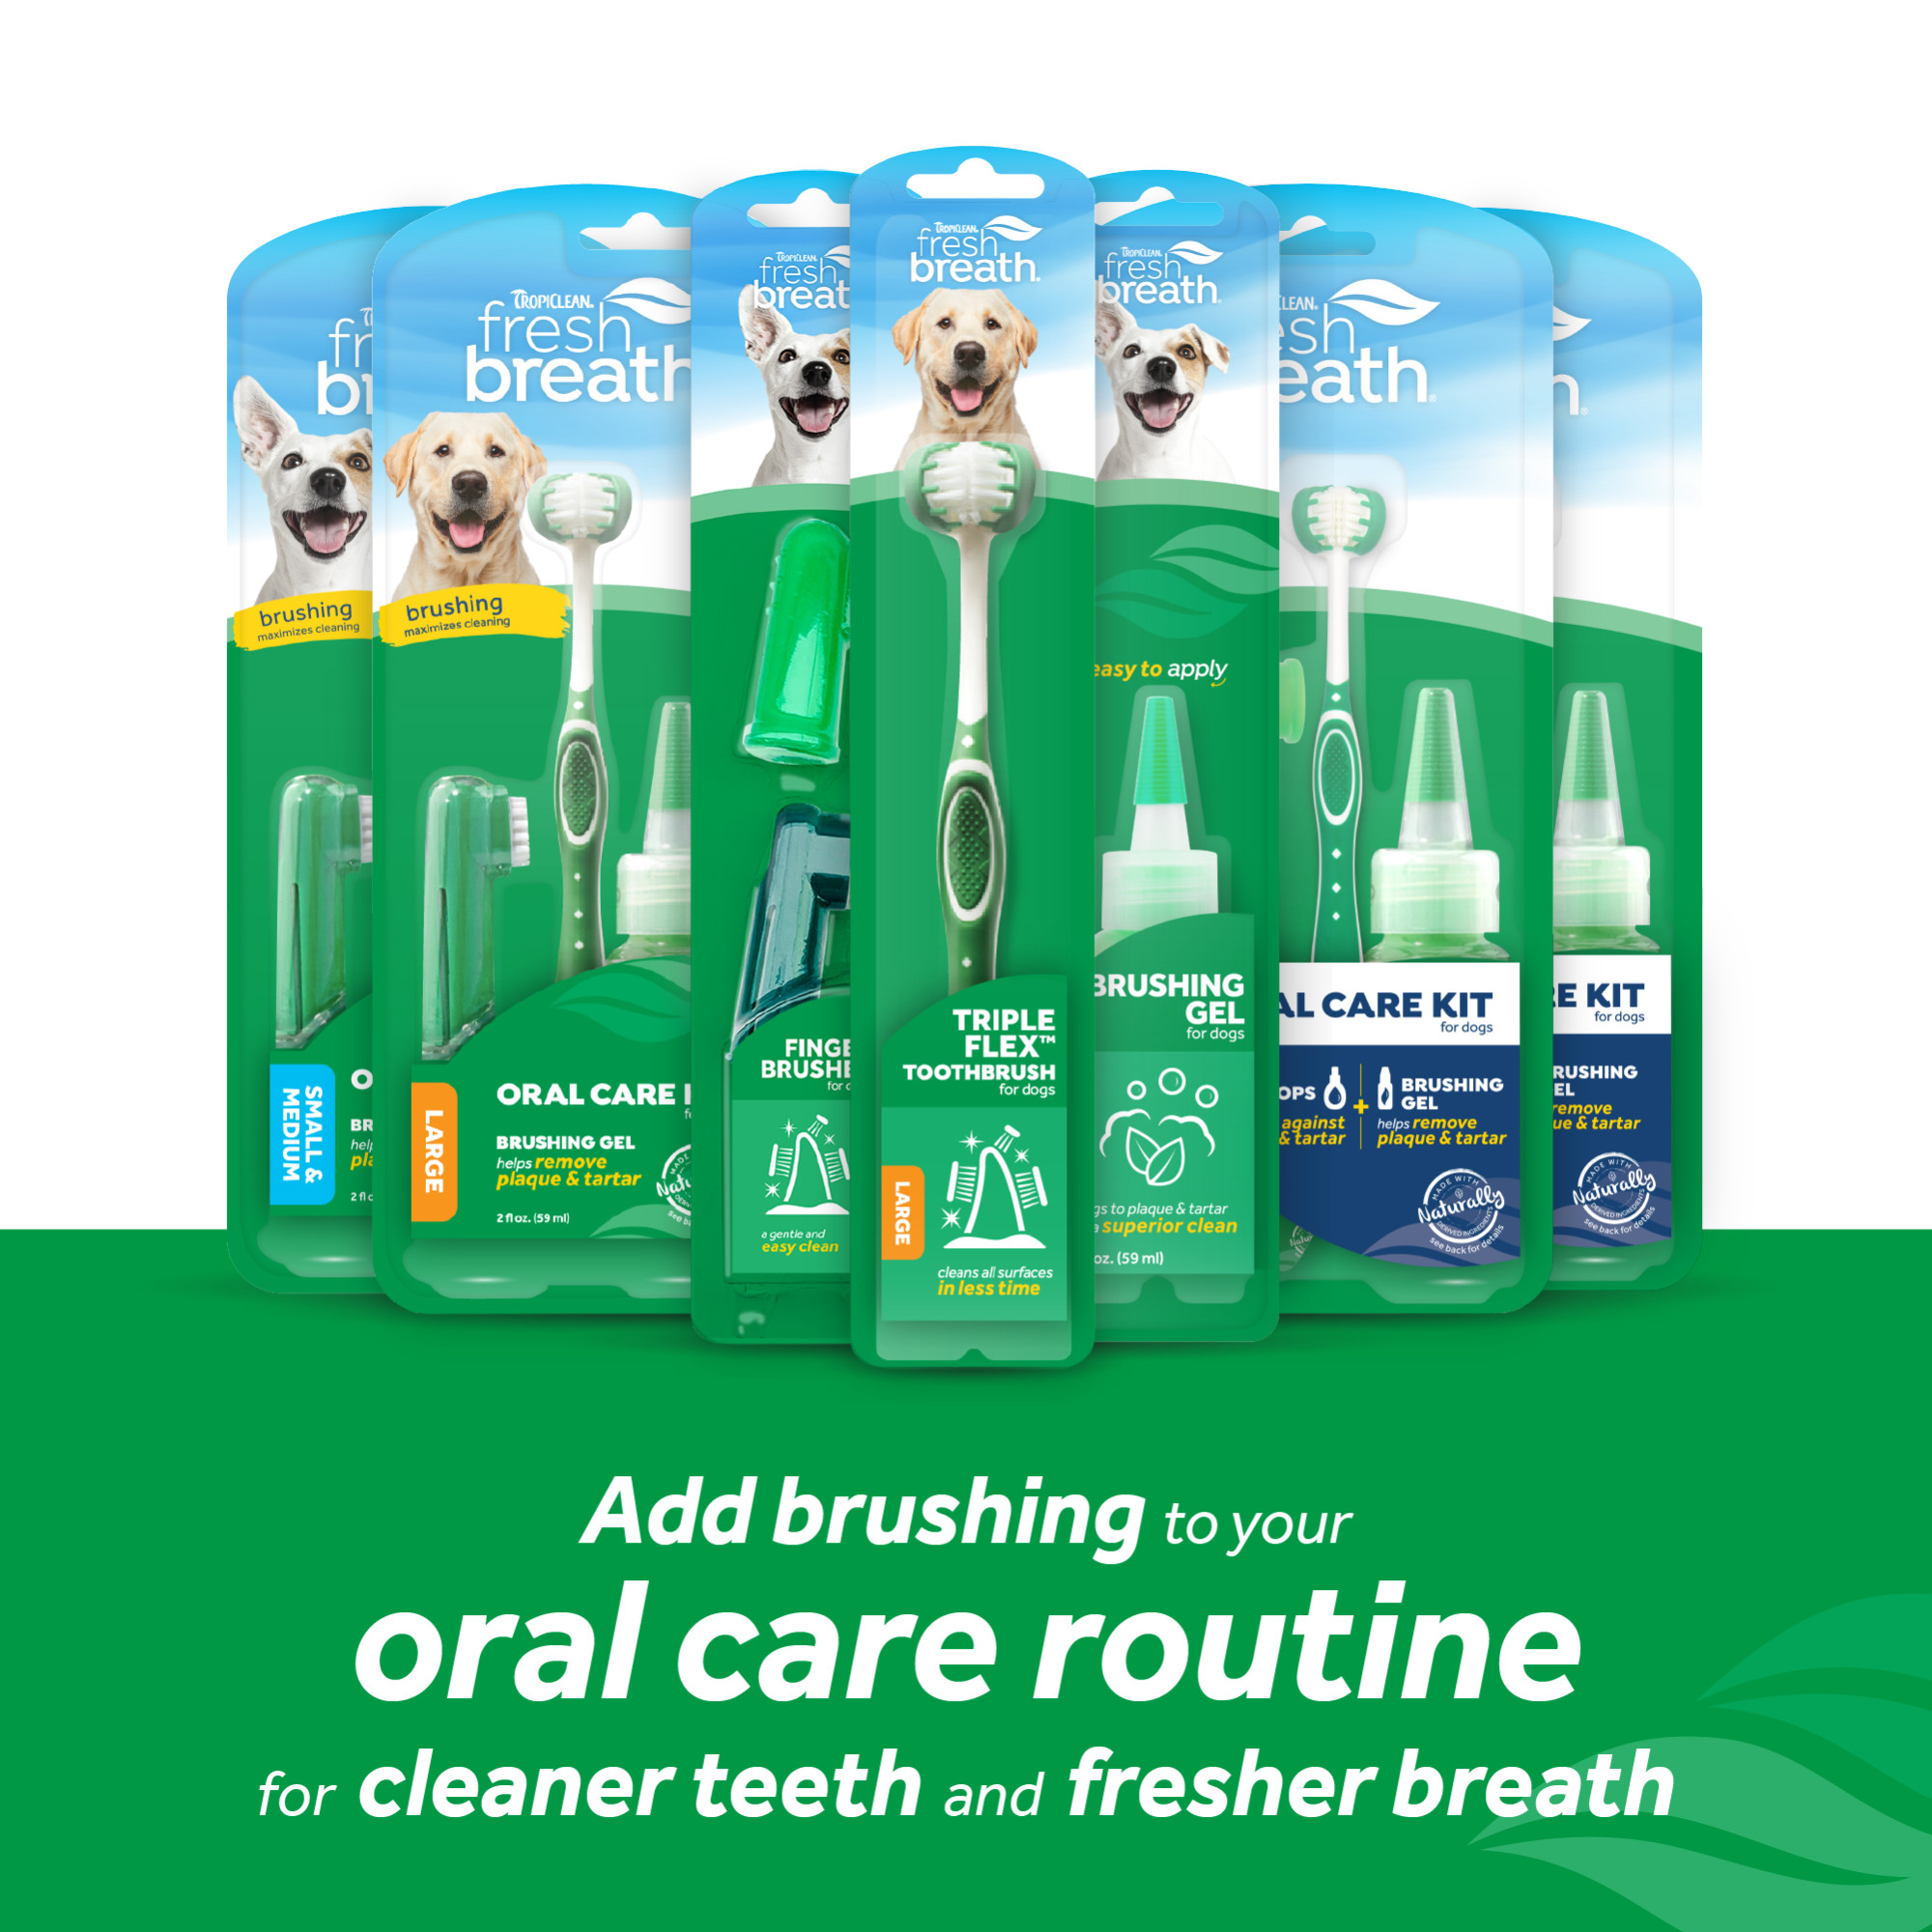 Oral Care Kit for Large Dogs